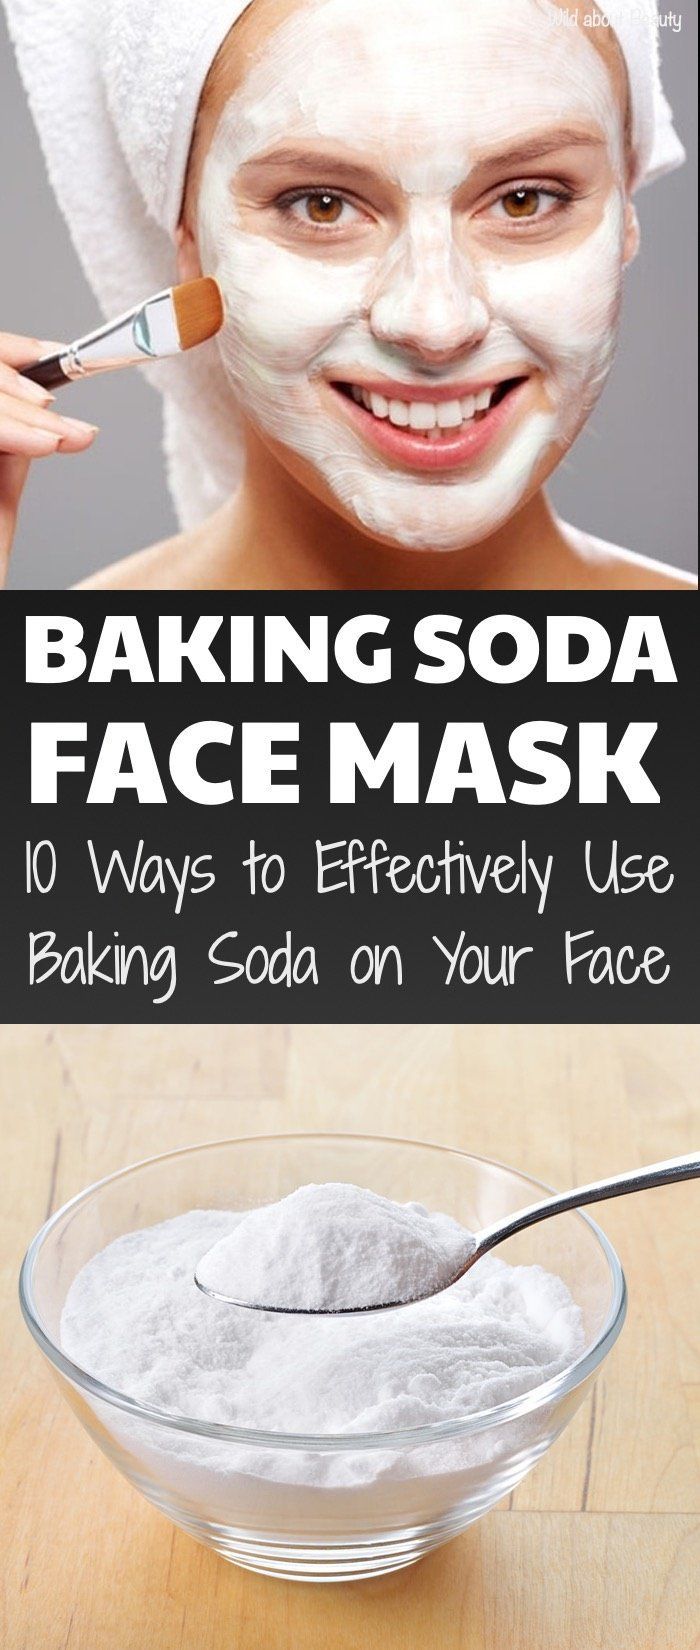 Baking Soda Face Mask – 10 Ways to Effectively Use on Your Face -   12 hair Makeup baking soda ideas